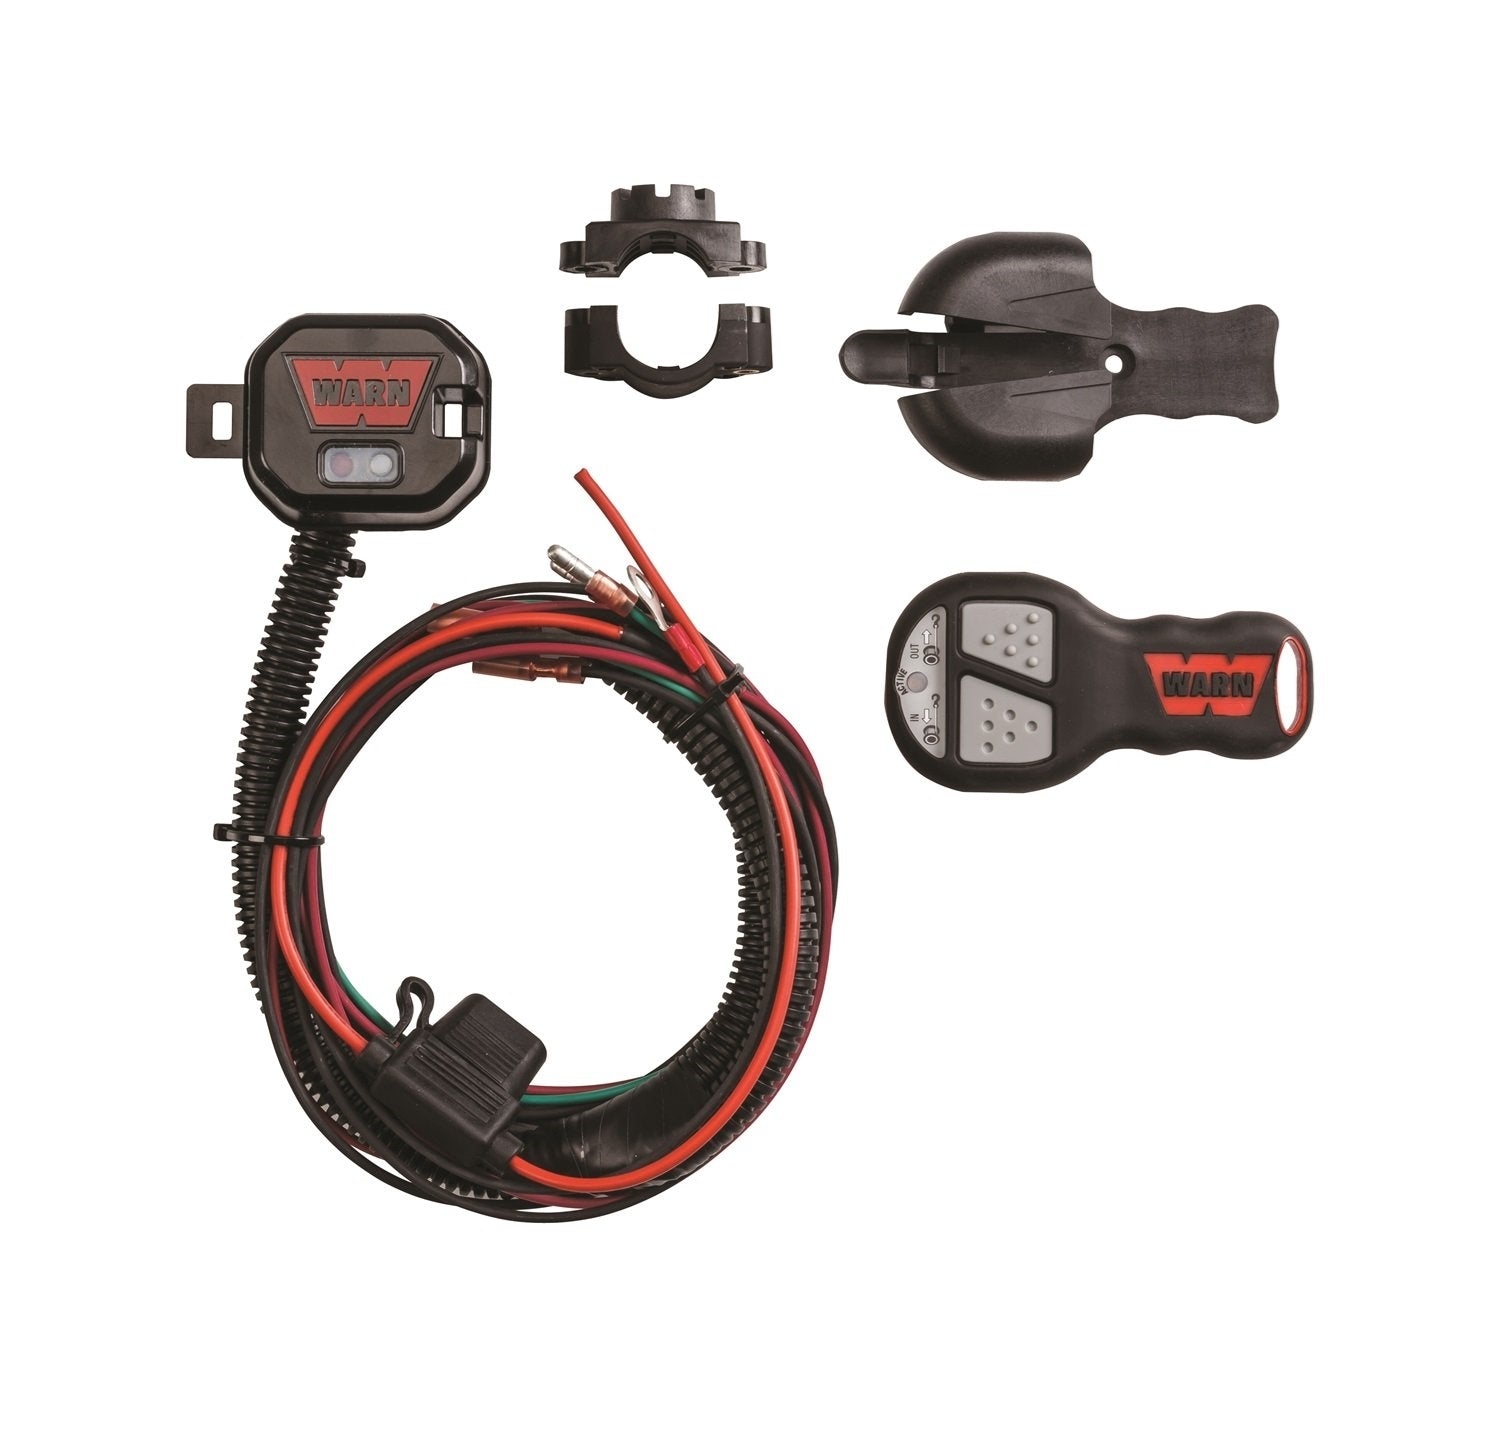 WARN Hub Wireless Receiver for PowerSports Winches